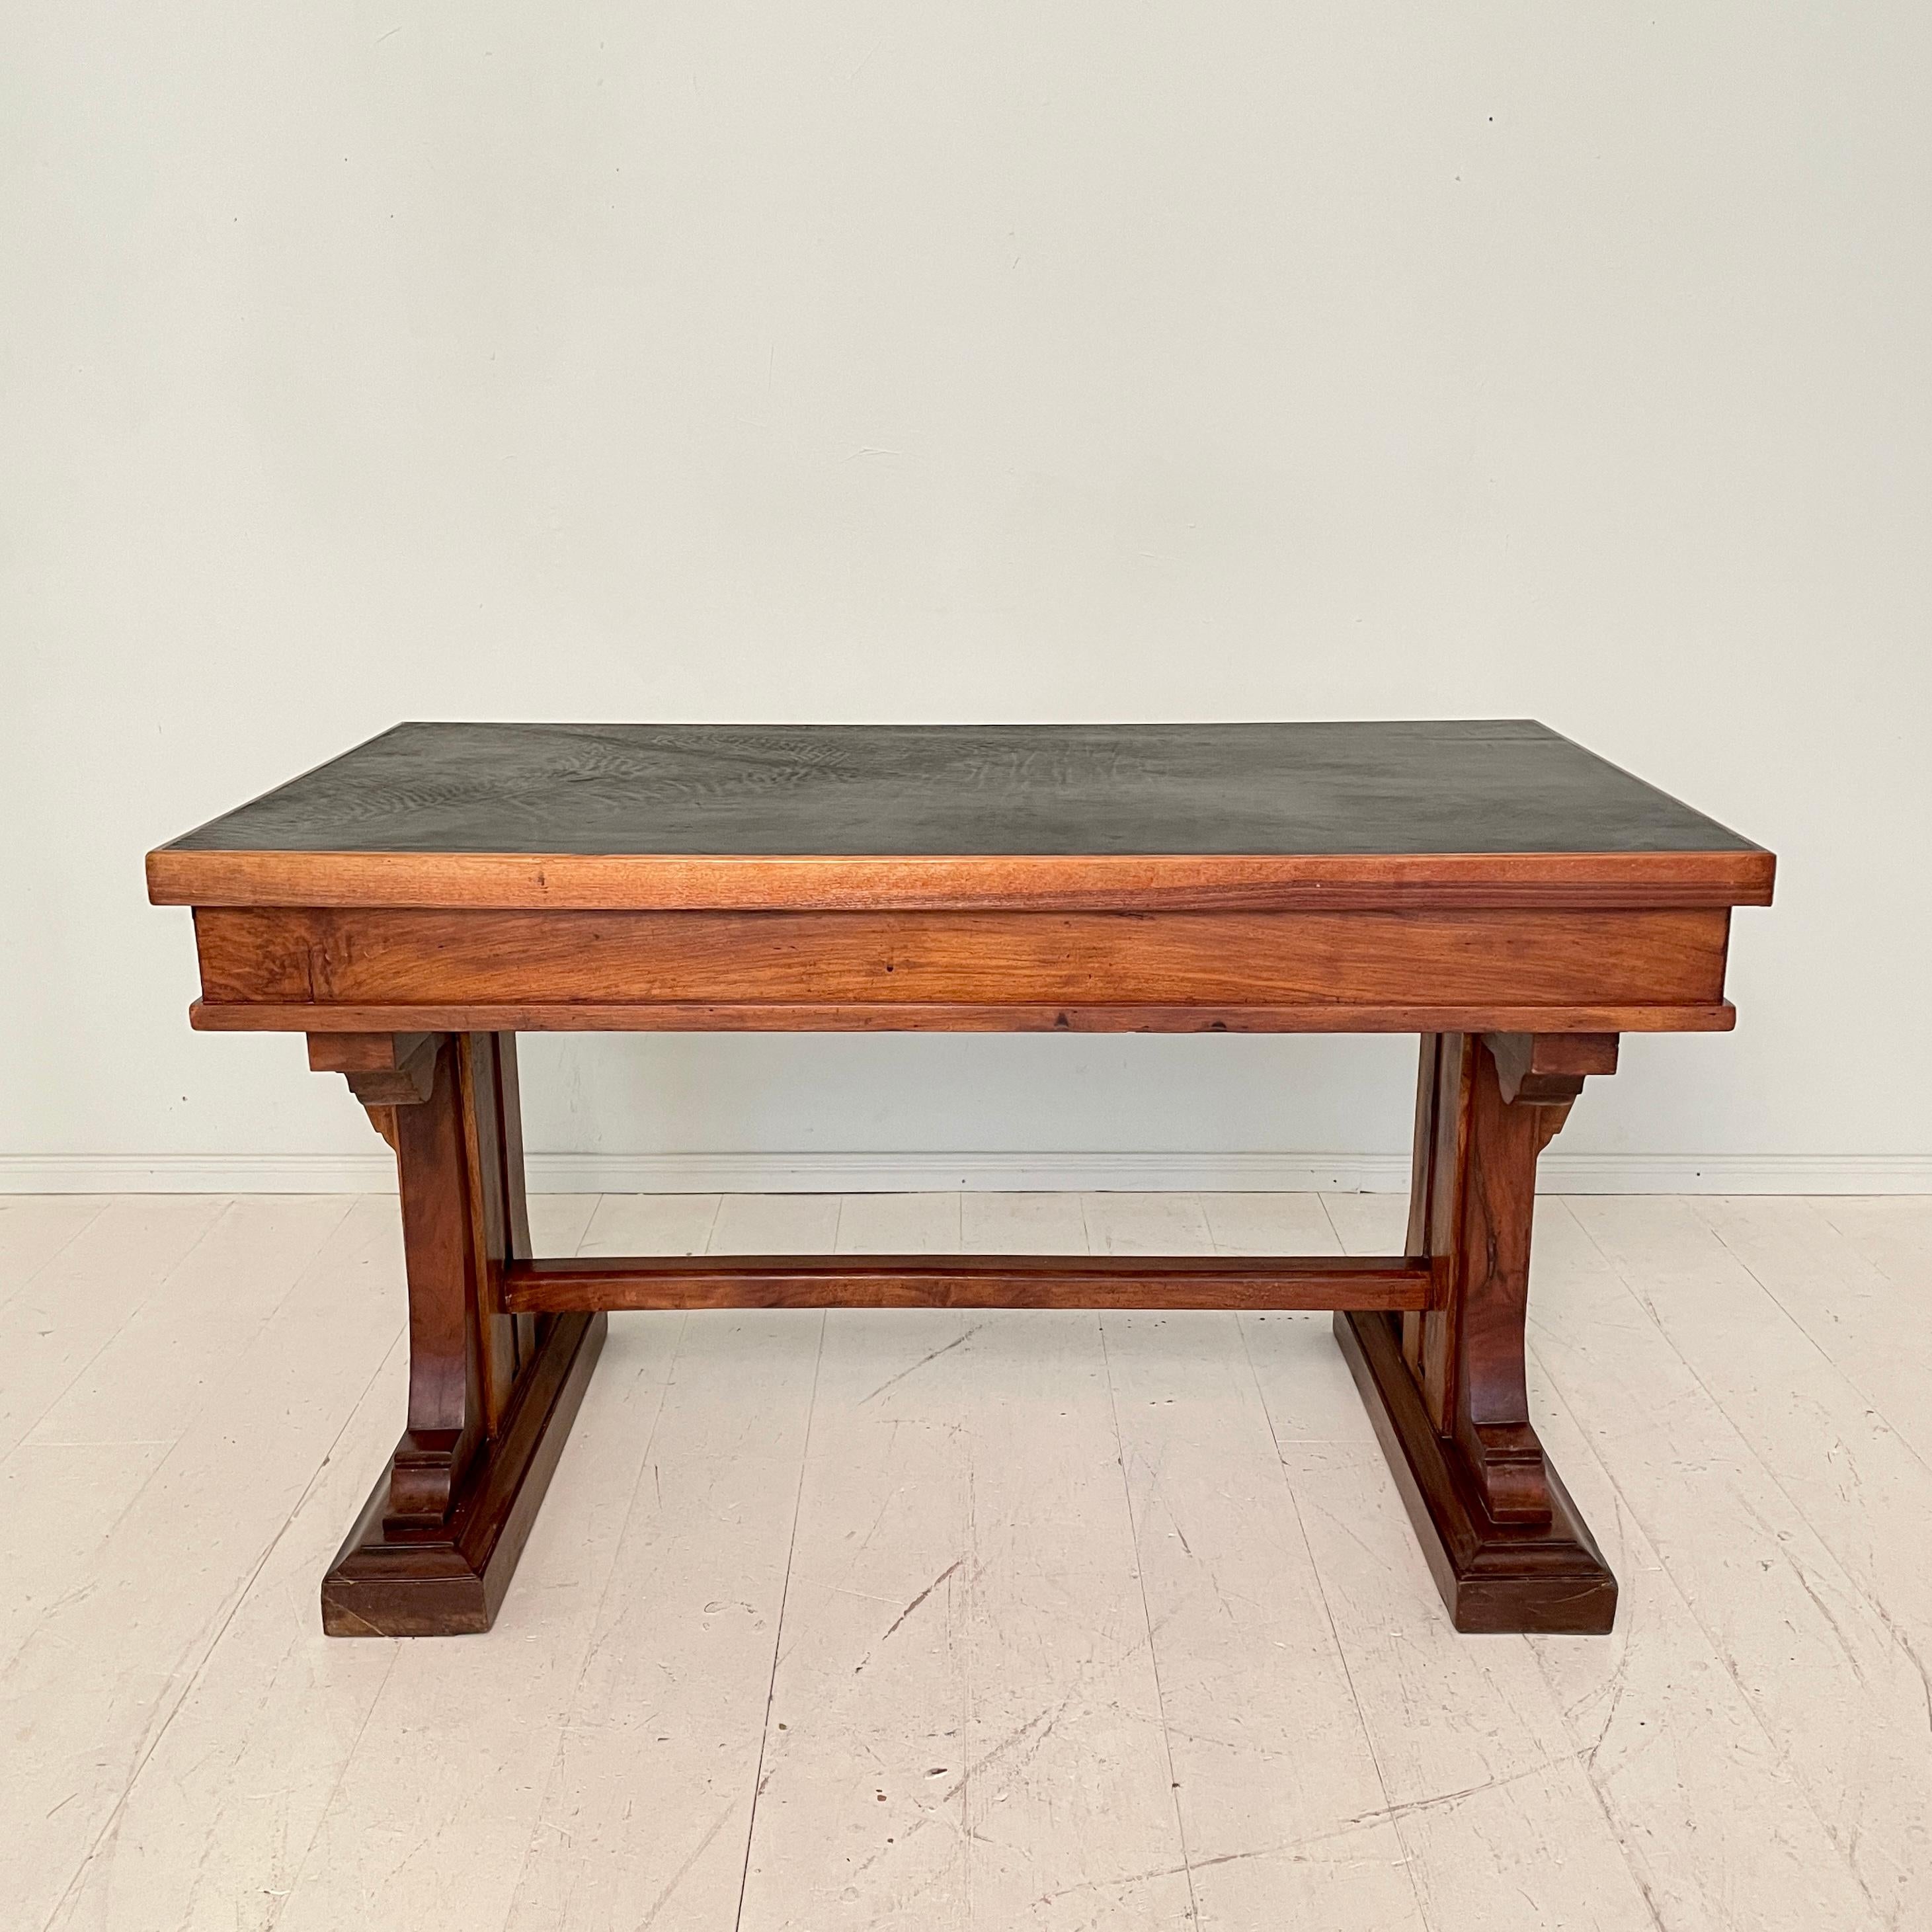 This beautiful eclectic Italian Art Deco desk or writing table was made in the 1920s.
It is make out of solid walnut and pine. The top is made out of black leather.
It is a mix out of Gothic, Renaissance and a could also come out of a